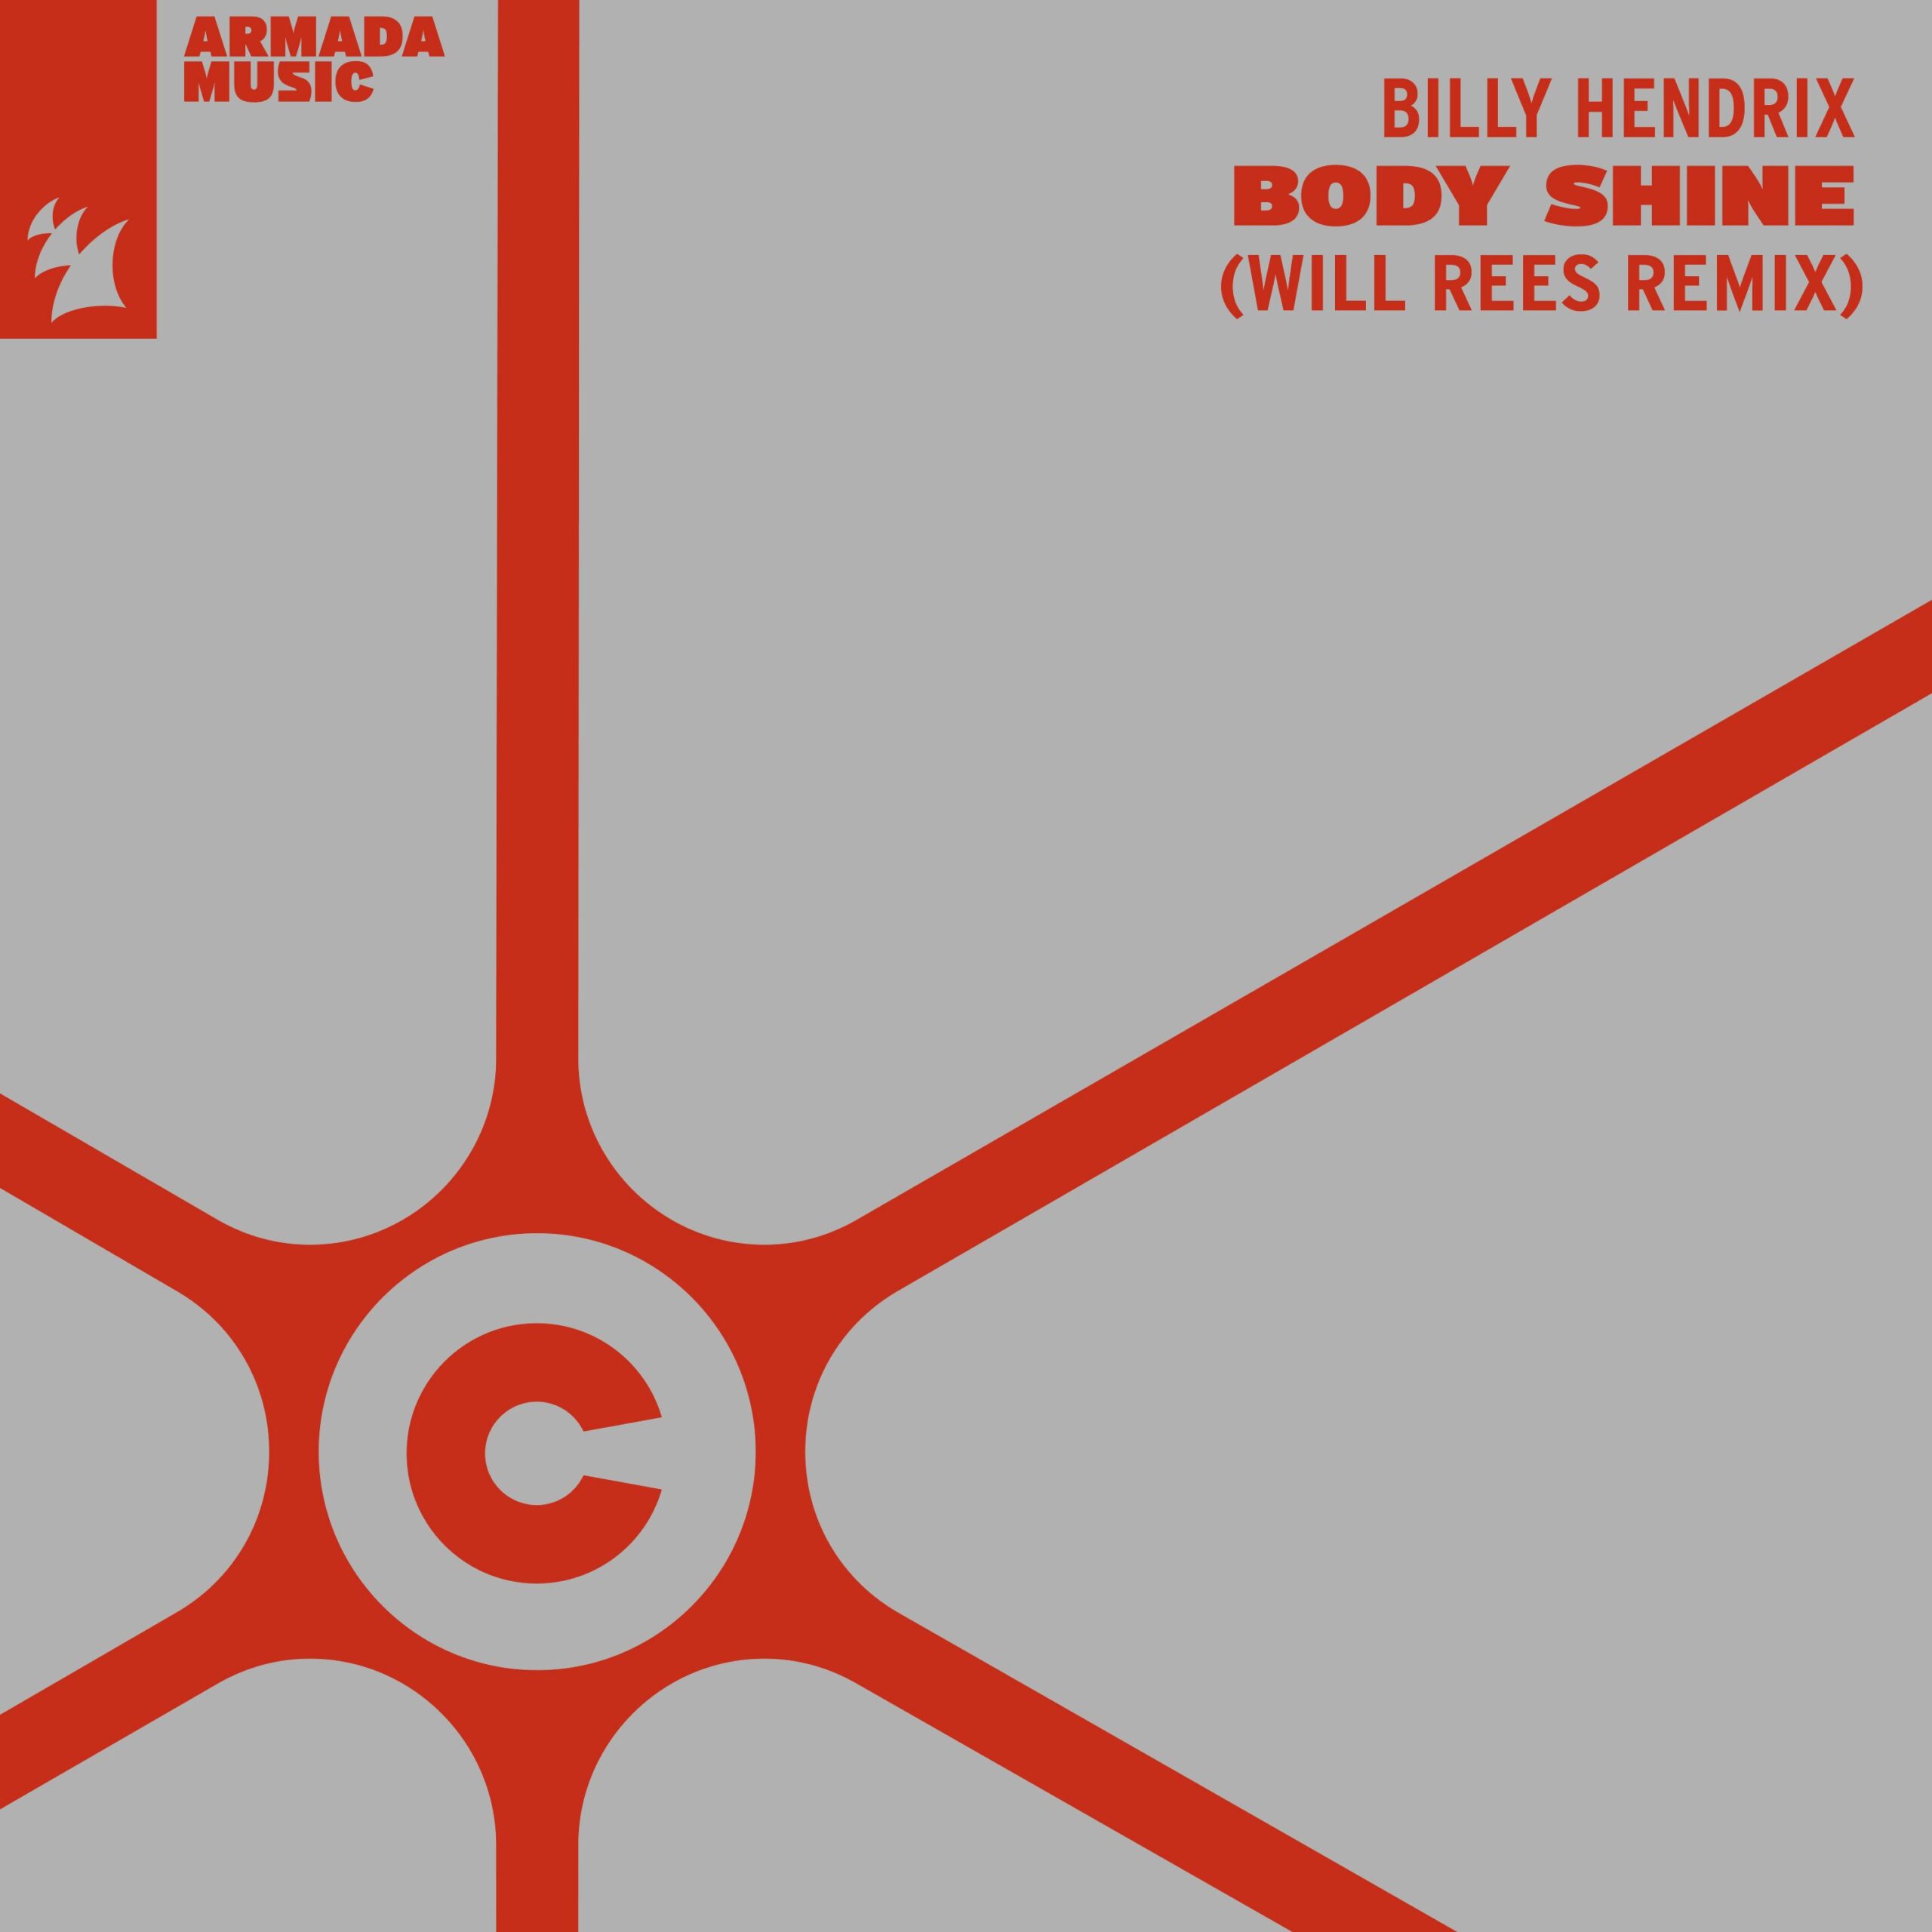 Billy Hendrix presents Body Shine (Will Rees Remix) on Armada Captivating